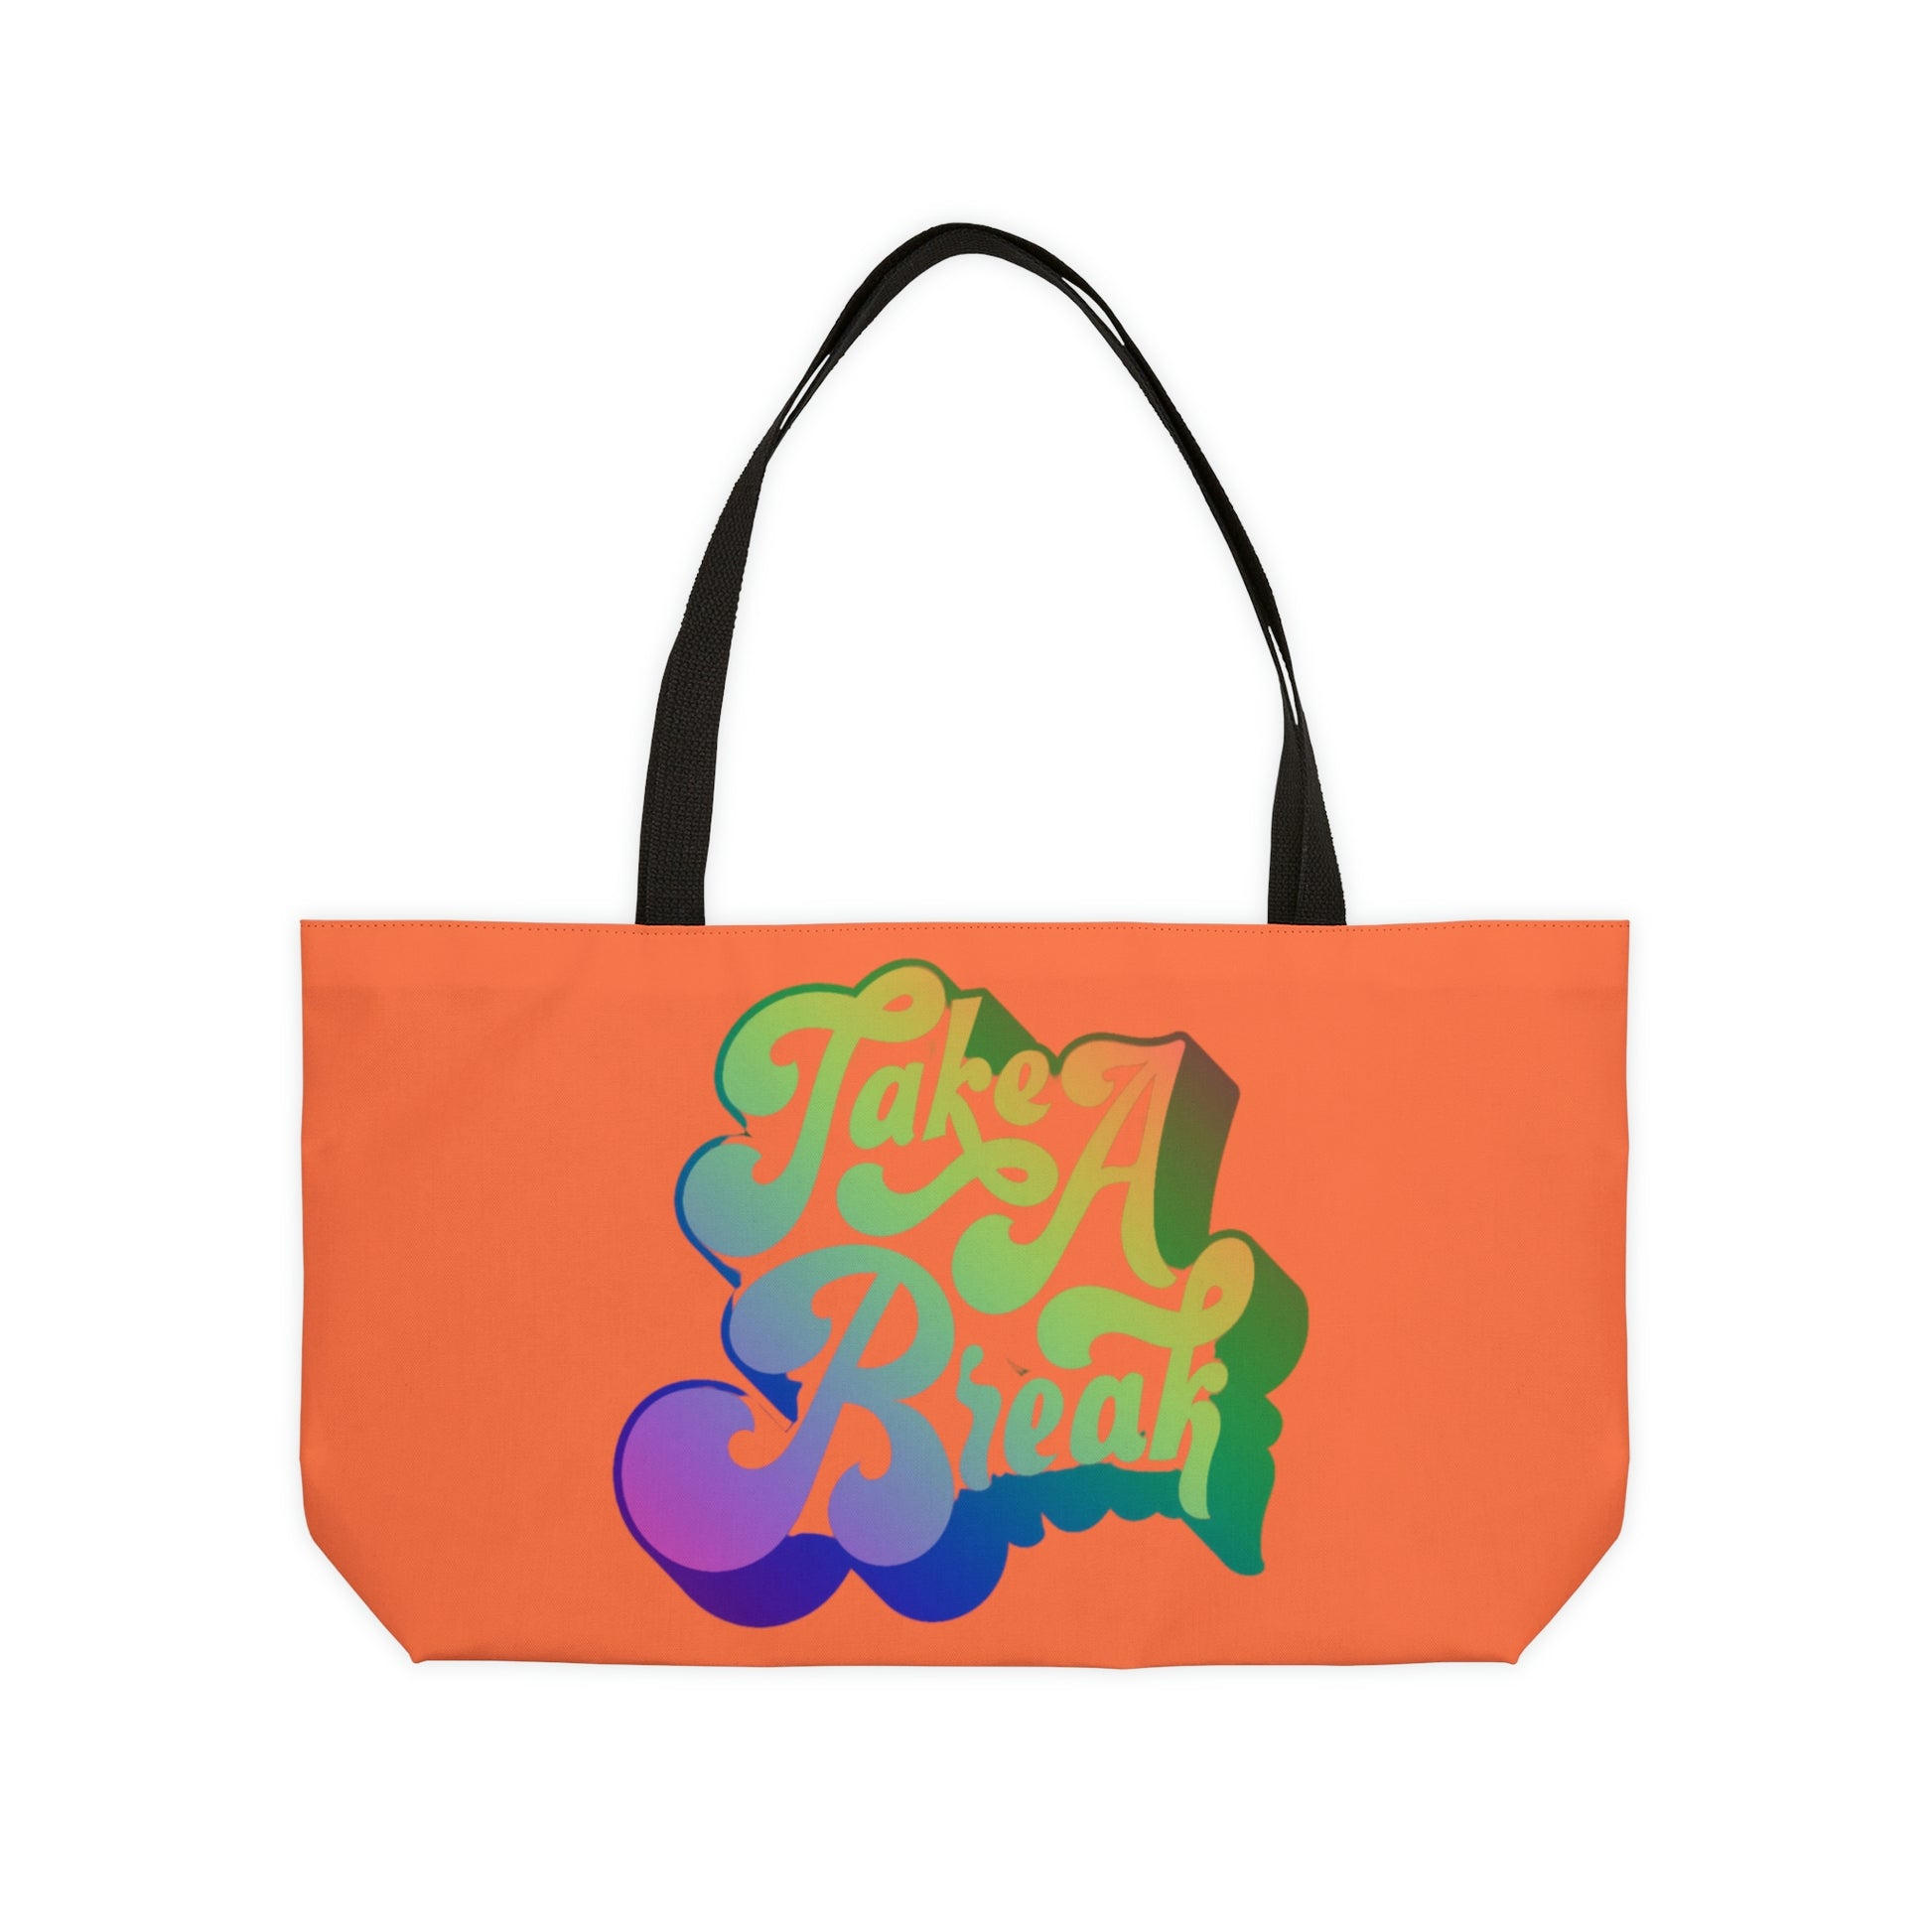 Take A Break Weekender Tote Bag | BKLA | Shoes & Accessories | shoes, hats, phone covers, tote bags, clutch bags